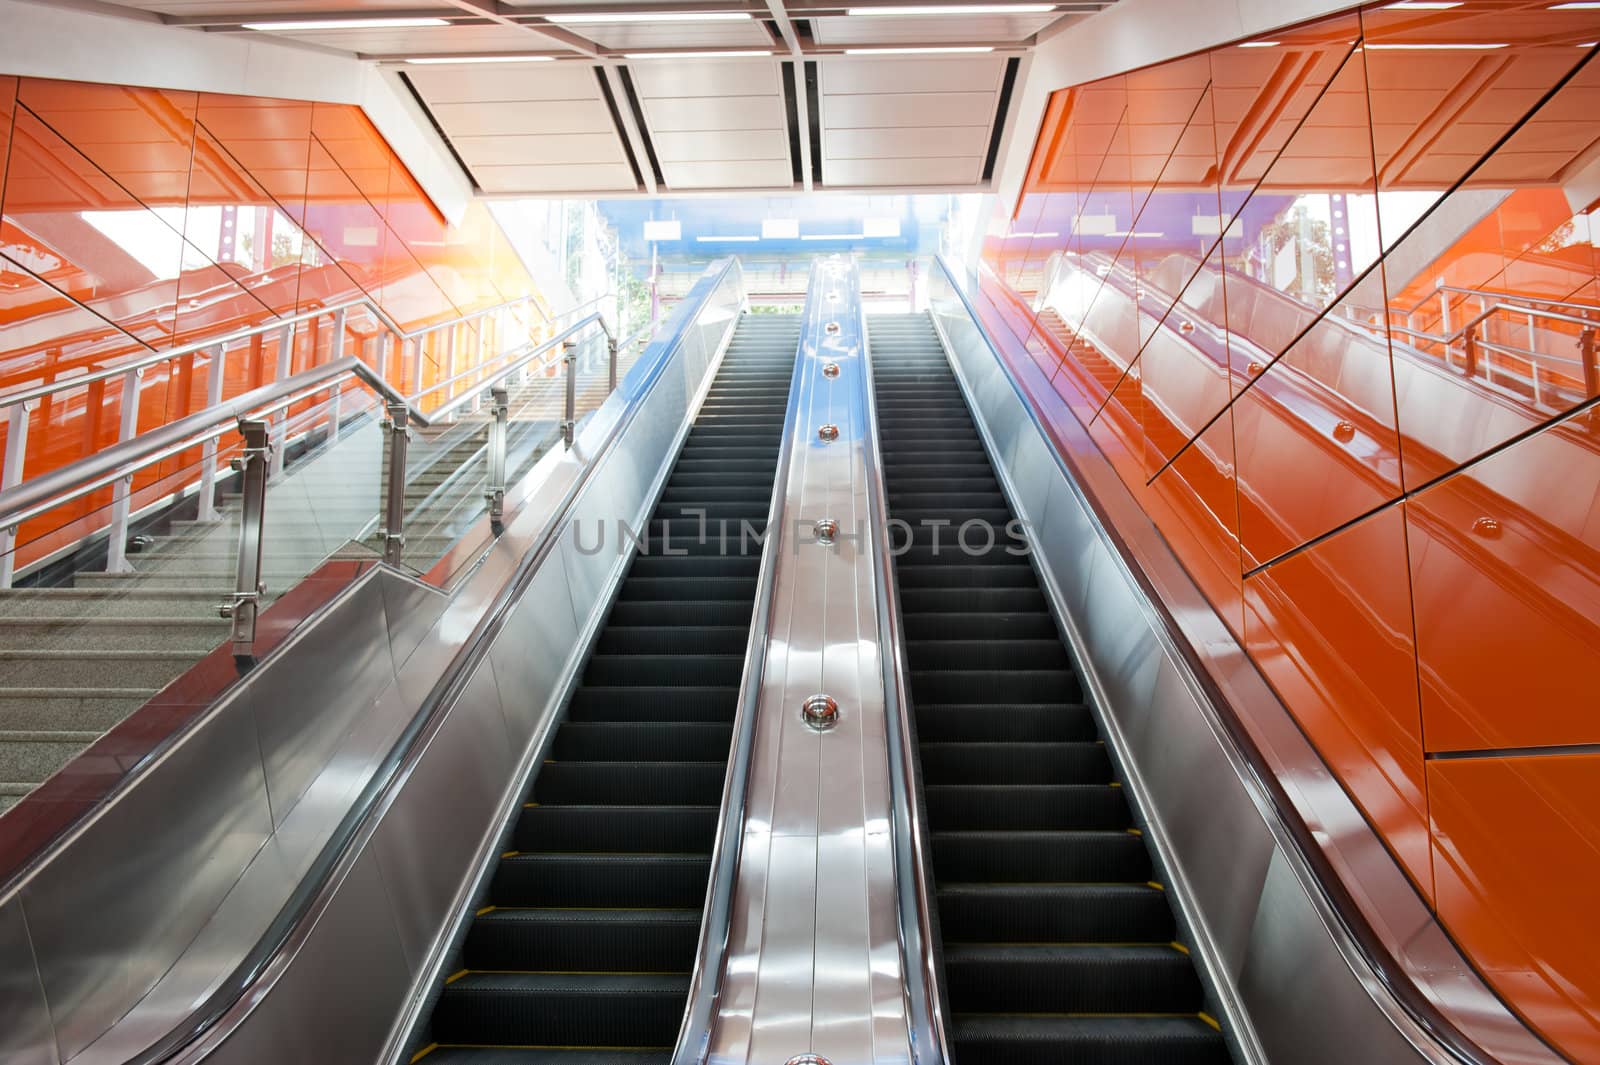 Escalator in the subway station in Guangzhou city, China